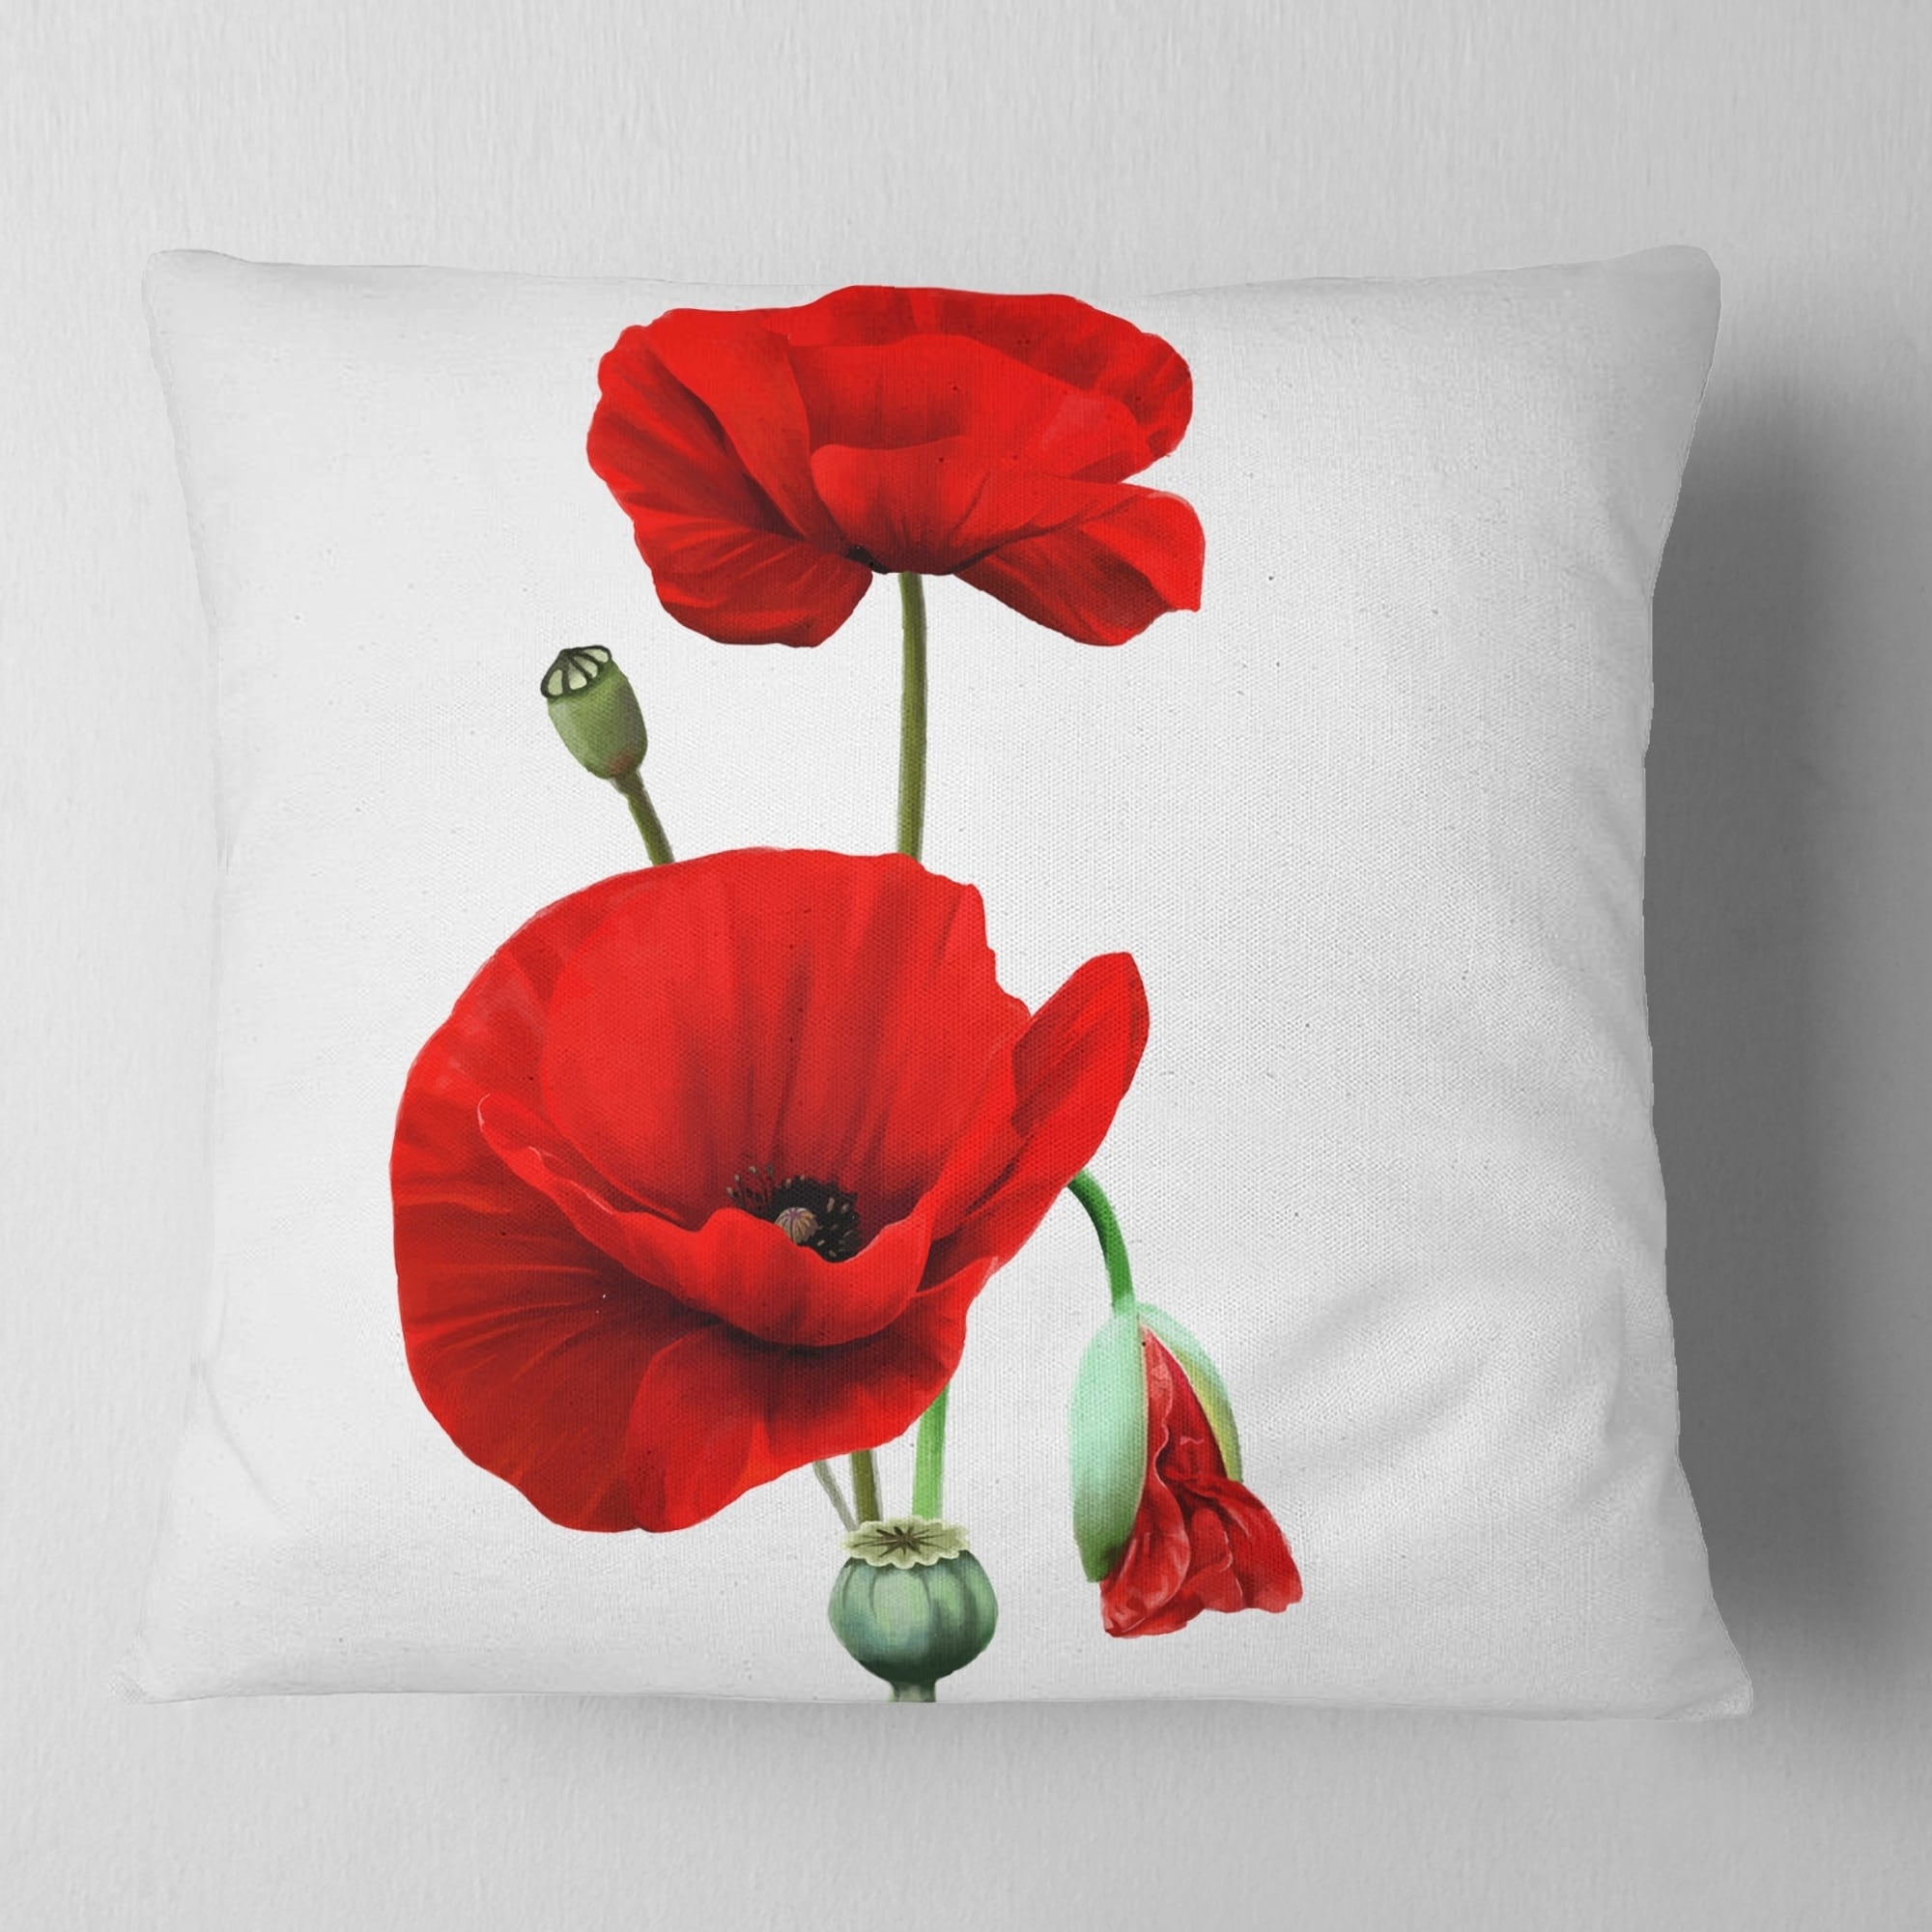 Designart CU13013-20-20-C Fantastic Poppy Flowers on White Floral Round Cushion Cover for Living Room Sofa Throw Pillow 20 